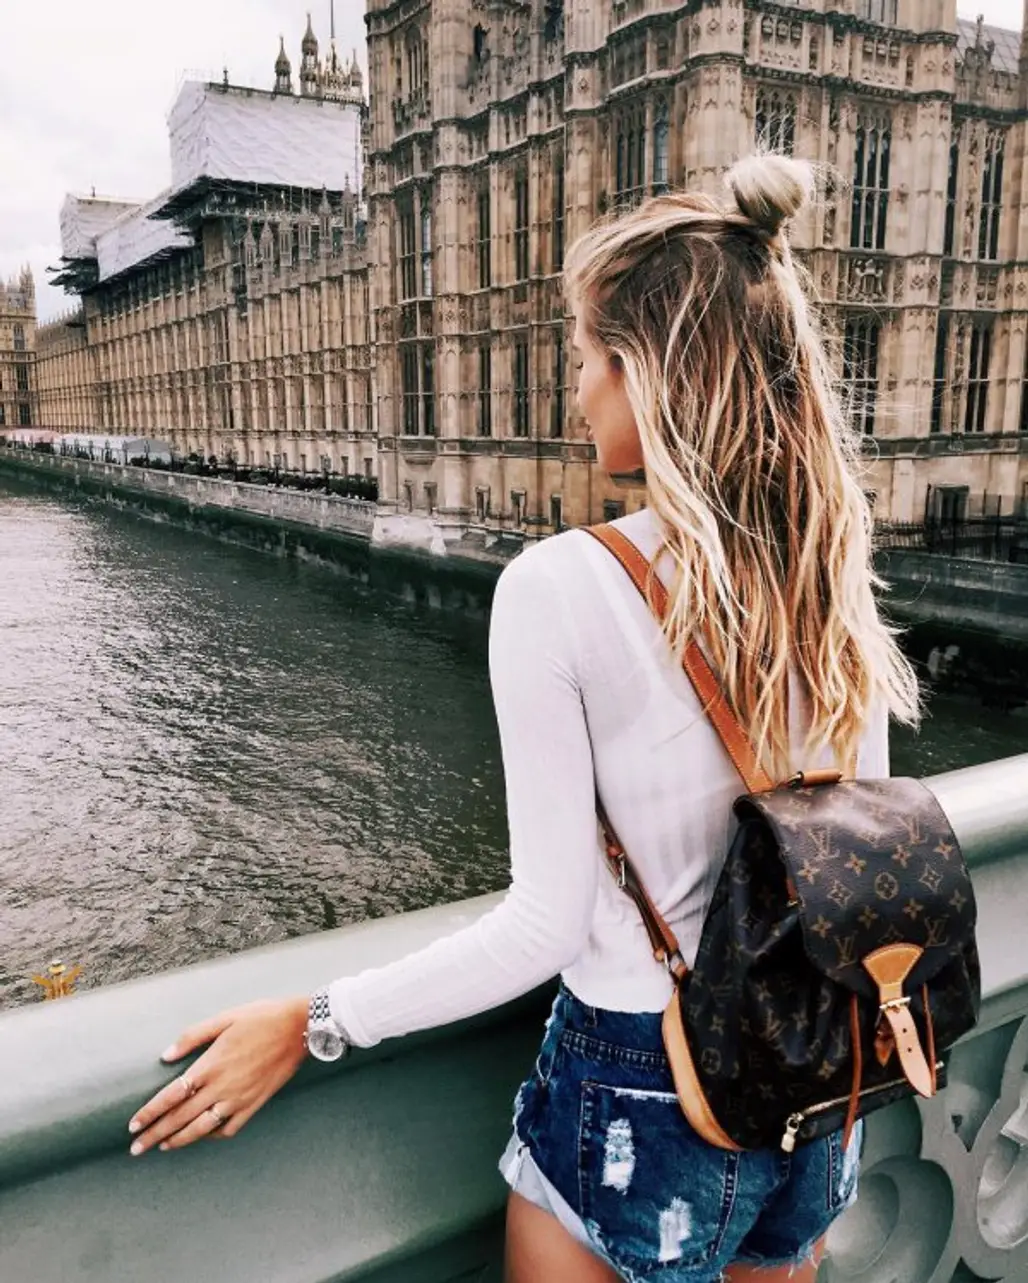 Houses of Parliament,Big Ben,photograph,clothing,woman,